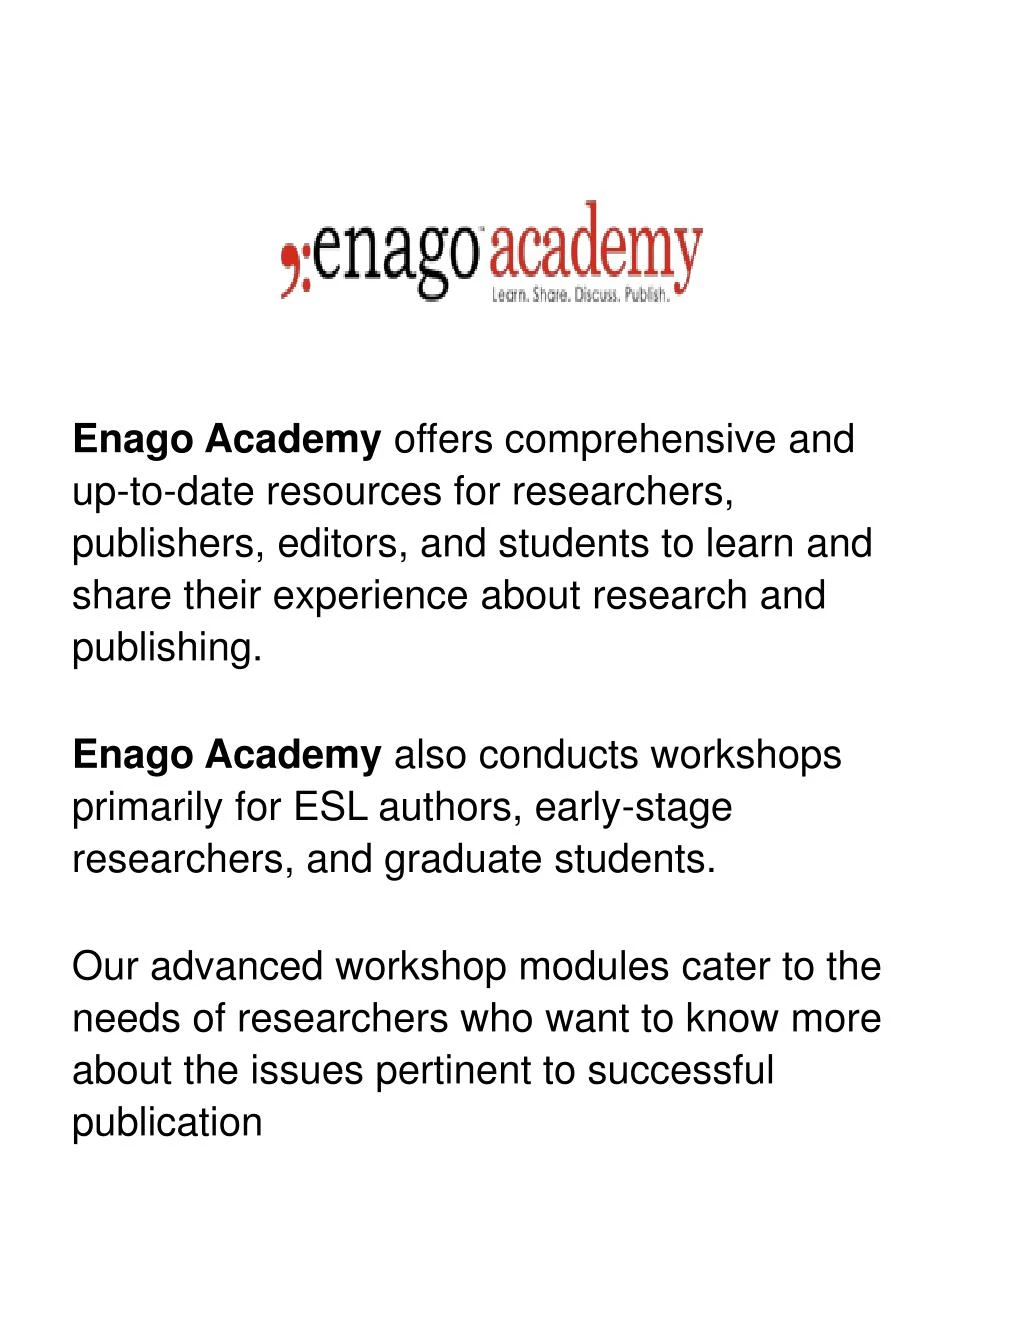 enago academy offers comprehensive and up to date